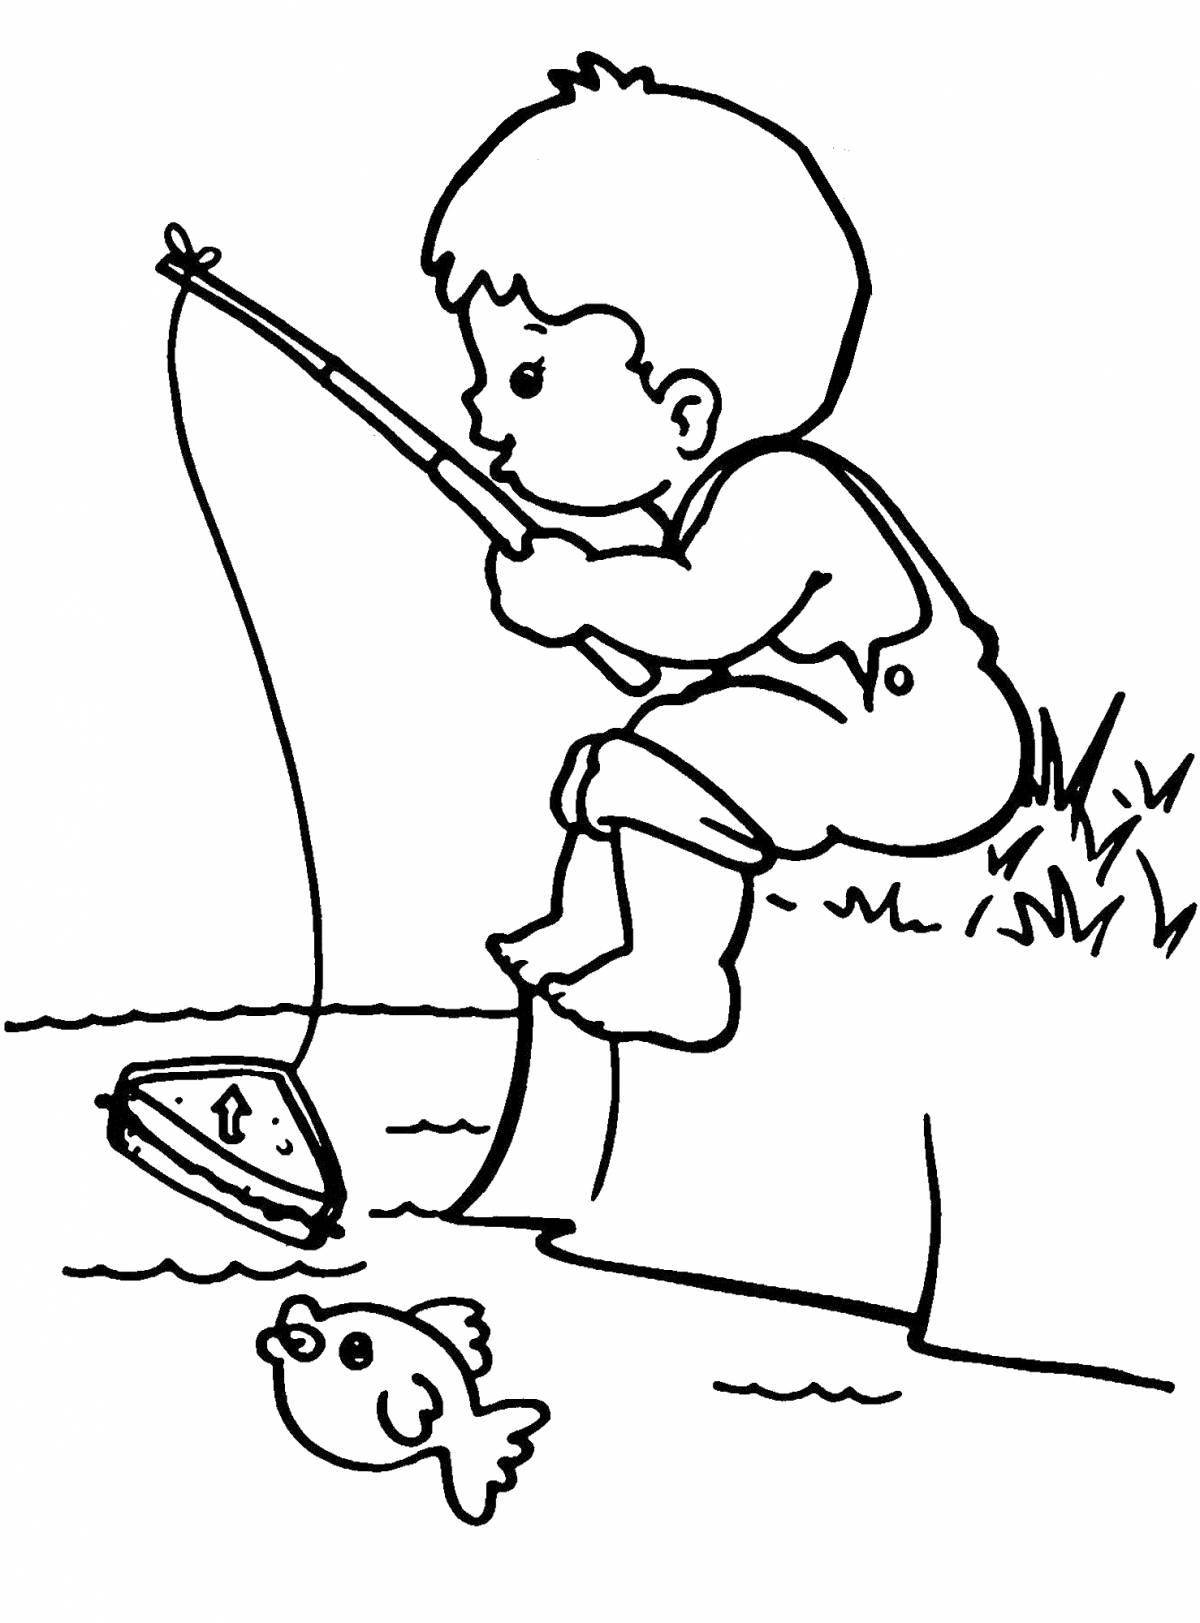 Playful winter fishing coloring page